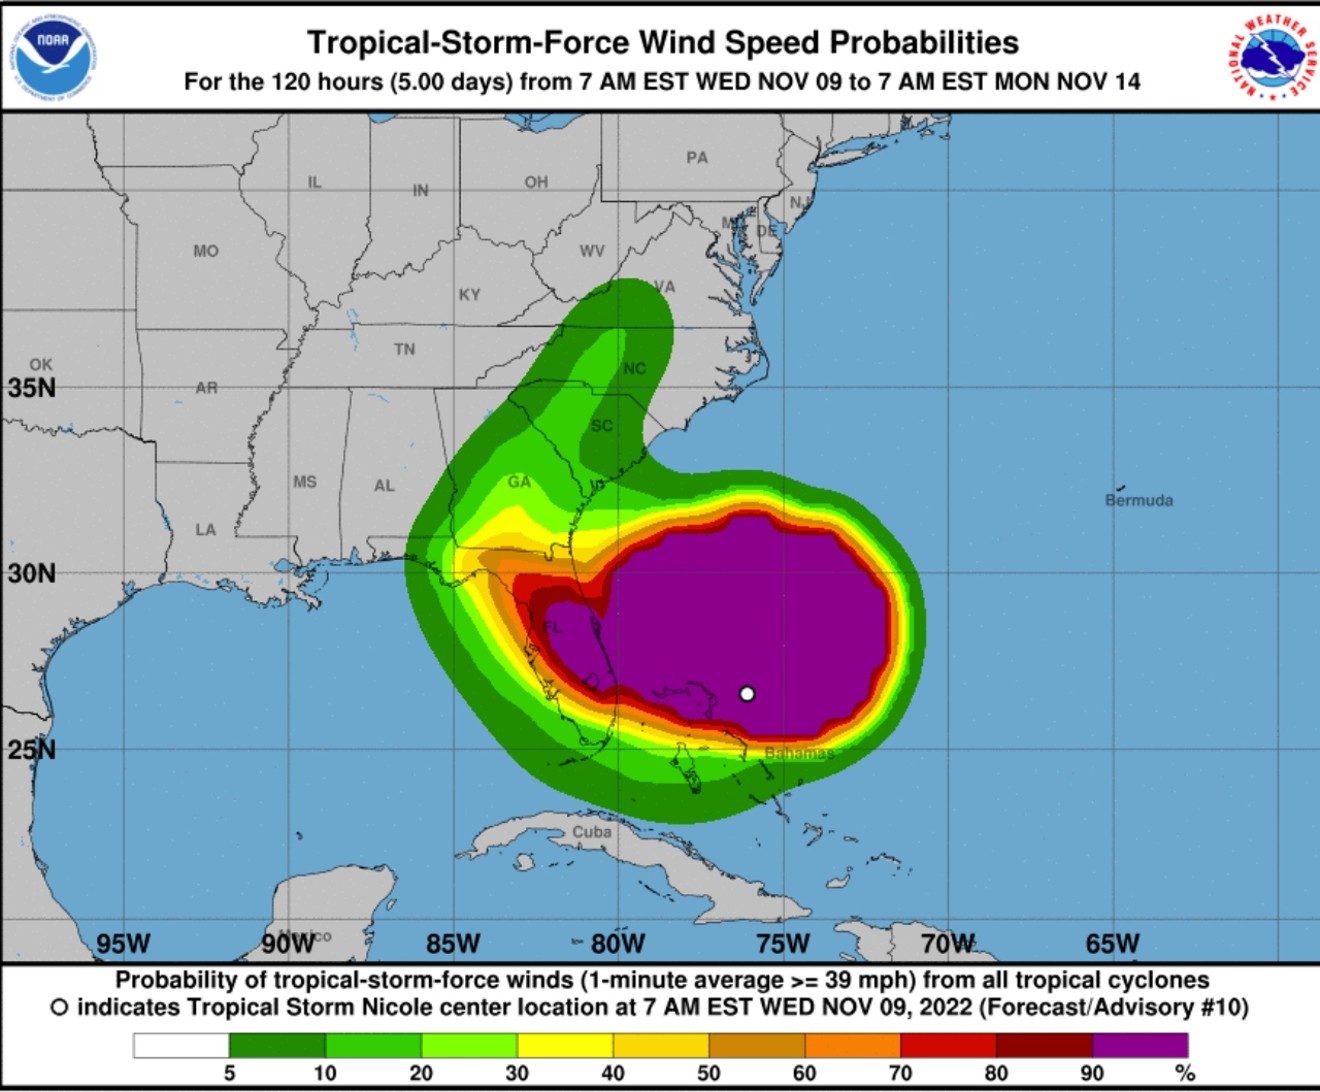 Wind speed projections for Tropical Storm Nicole show she's a plus-size model and will likely cover much of Florida.